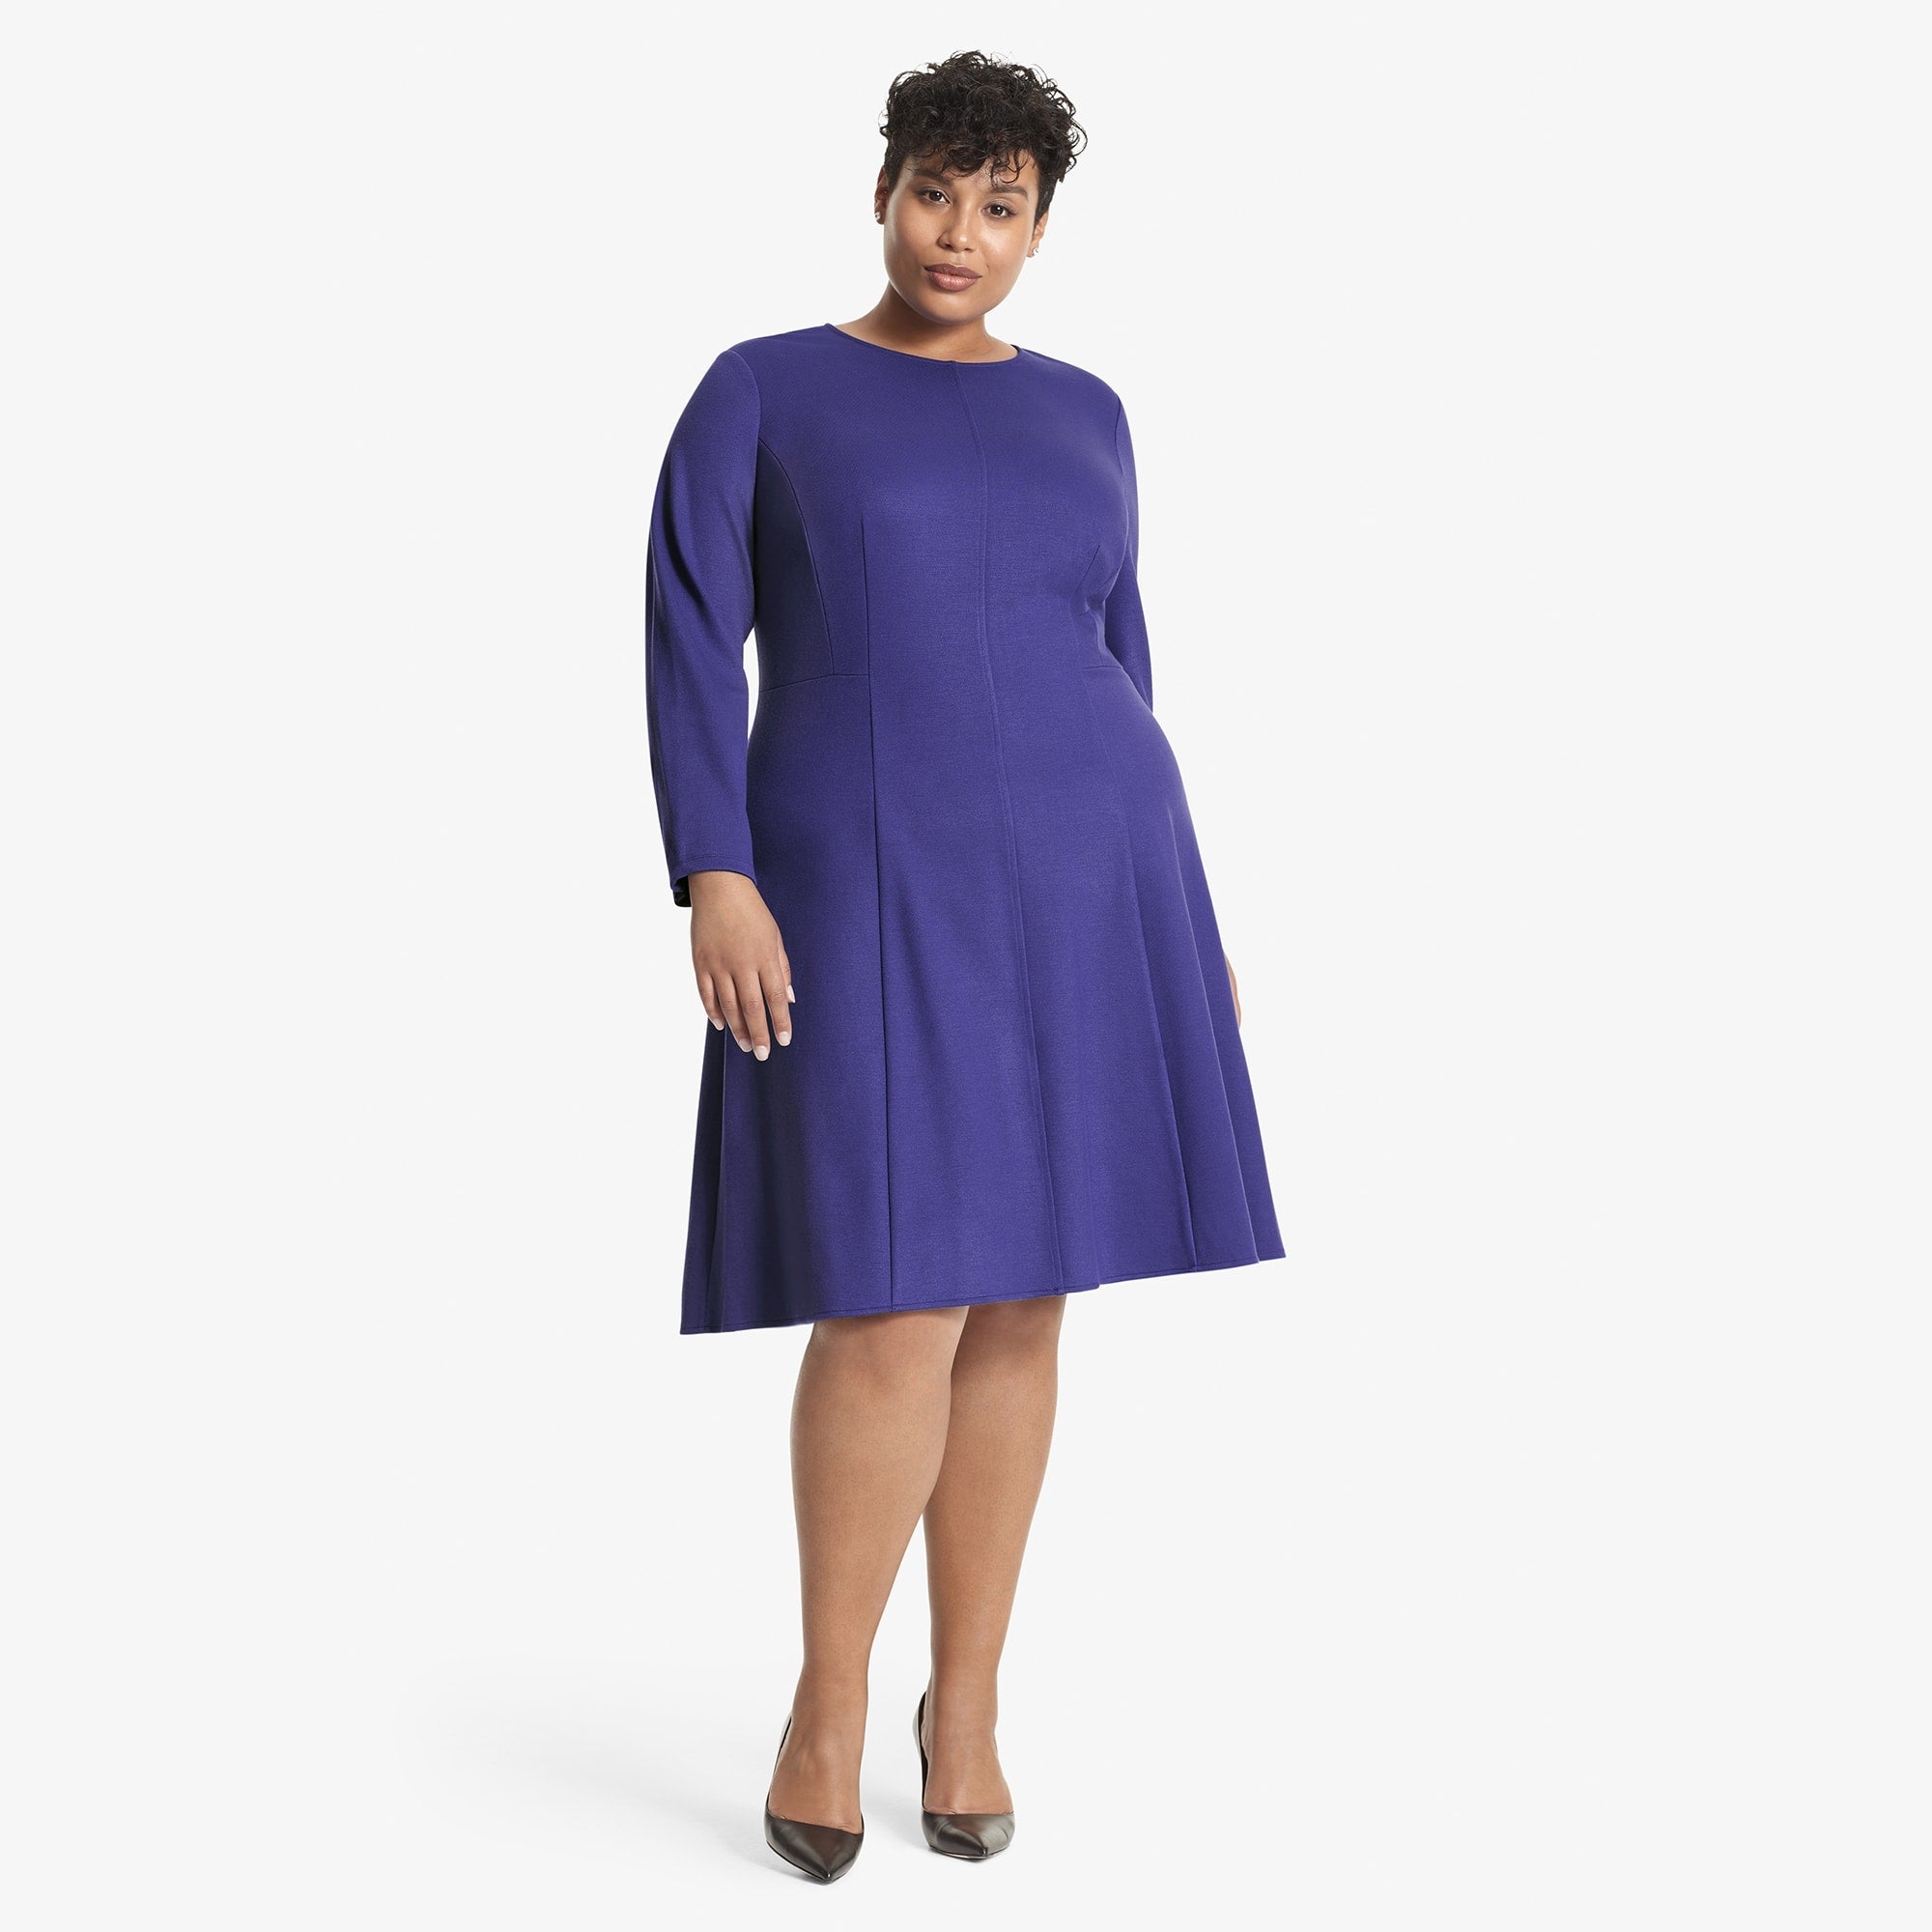 Front image of a woman standing wearing the Ellis dress textured ponte in Violet 